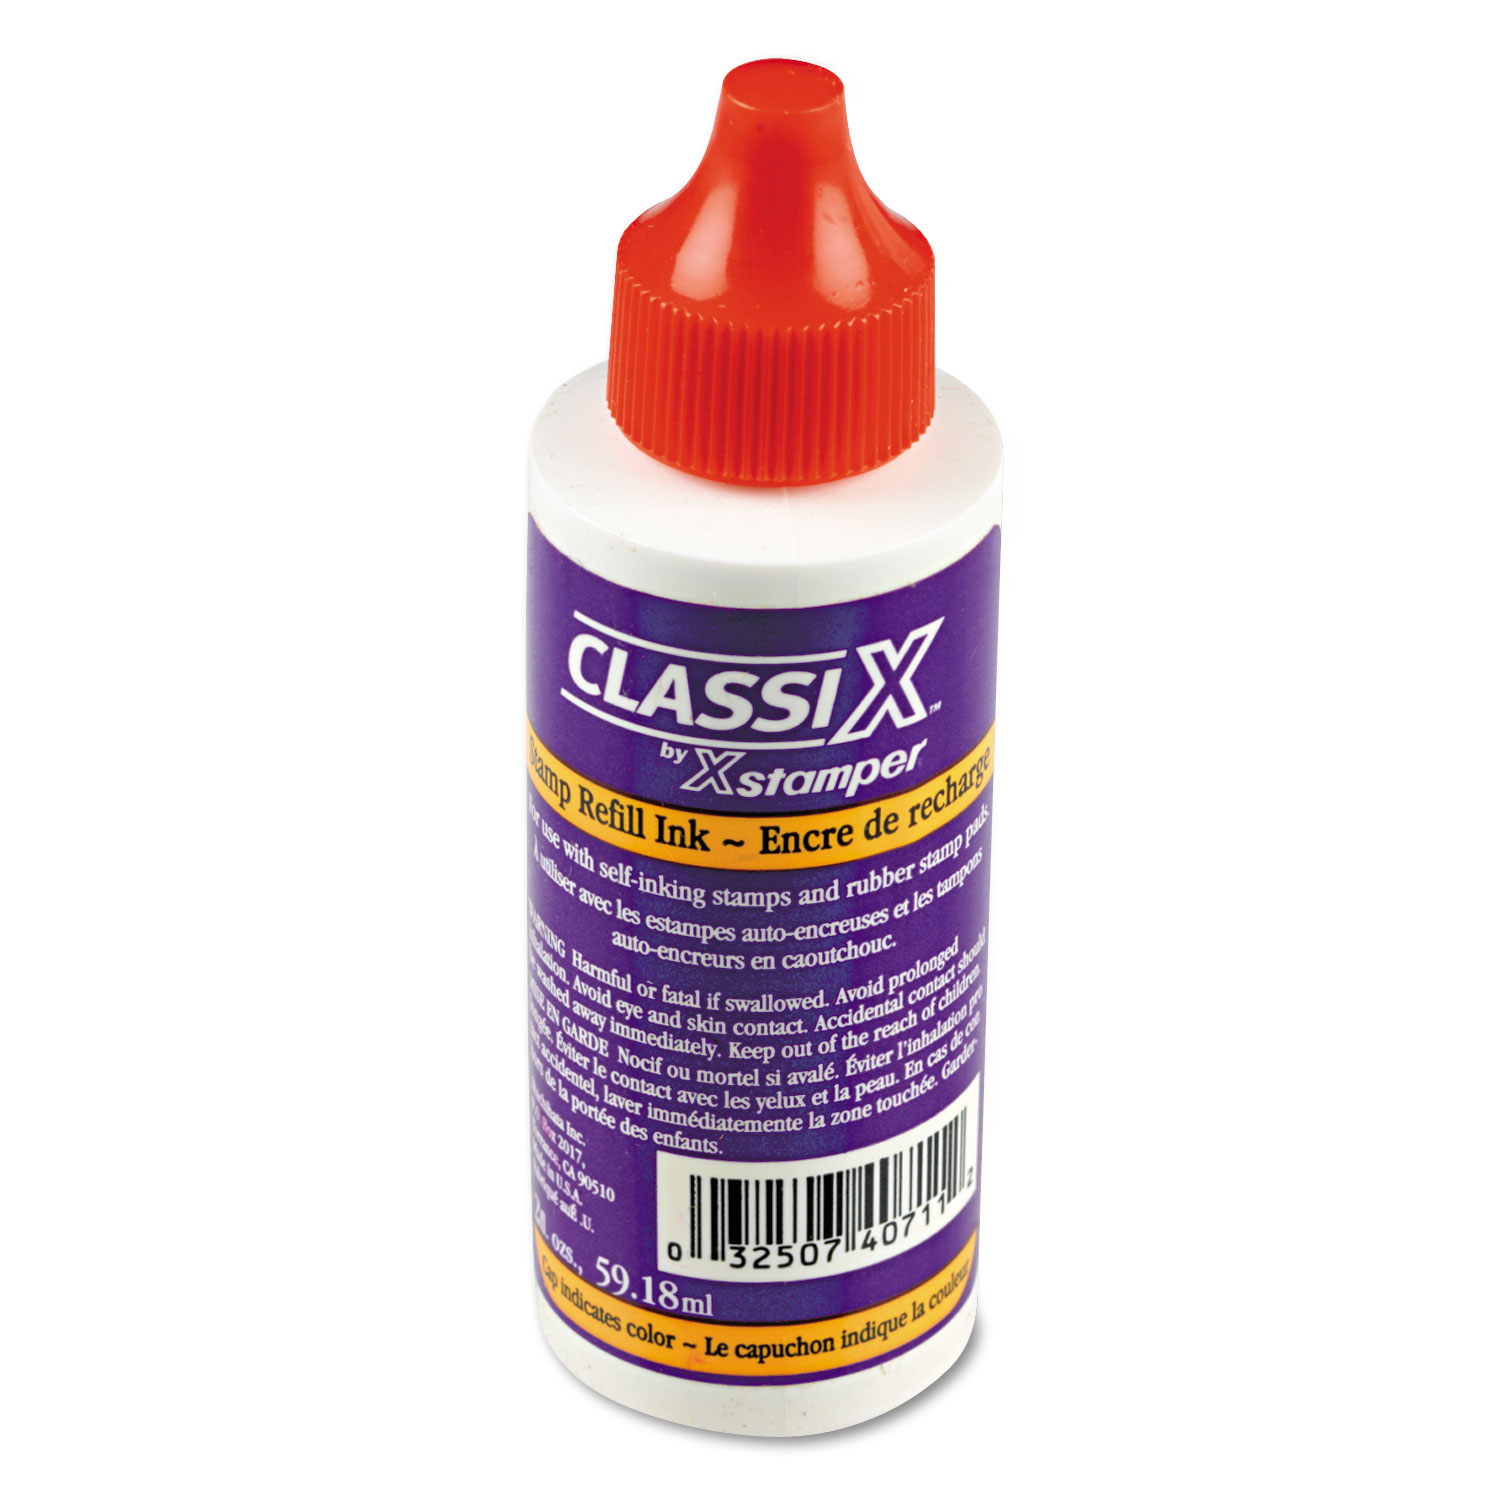  ClassiX 036042 Refill Ink for Classix Stamps, 2 oz Bottle, Red (XST40711) 